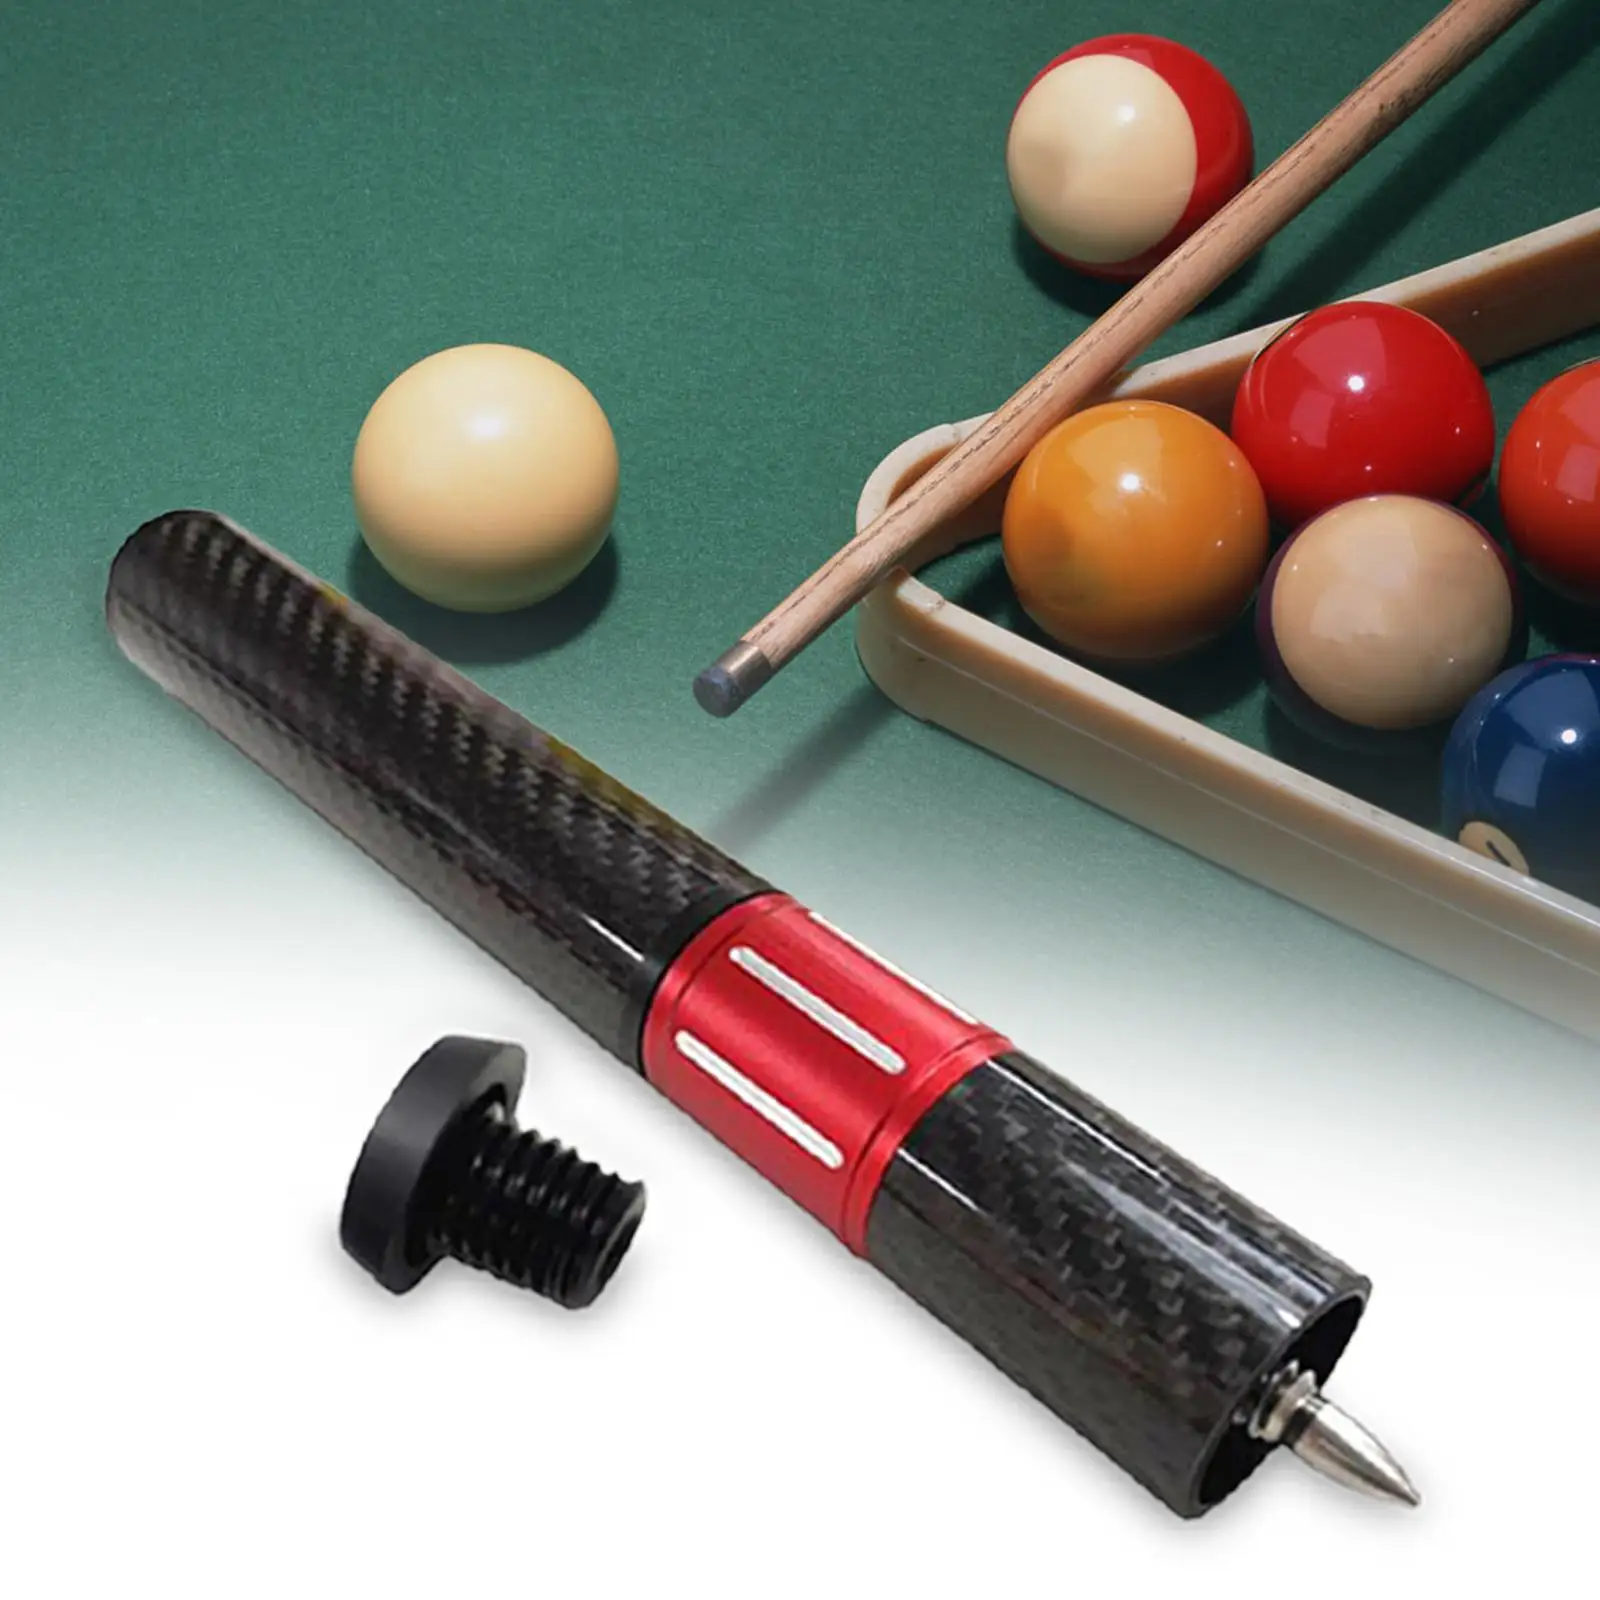 Billiards Pool Cue Extension with Bumper Cue End Extender Adapter Snooker Cue Stick for Games Billiard Cues Enthusiast Beginners